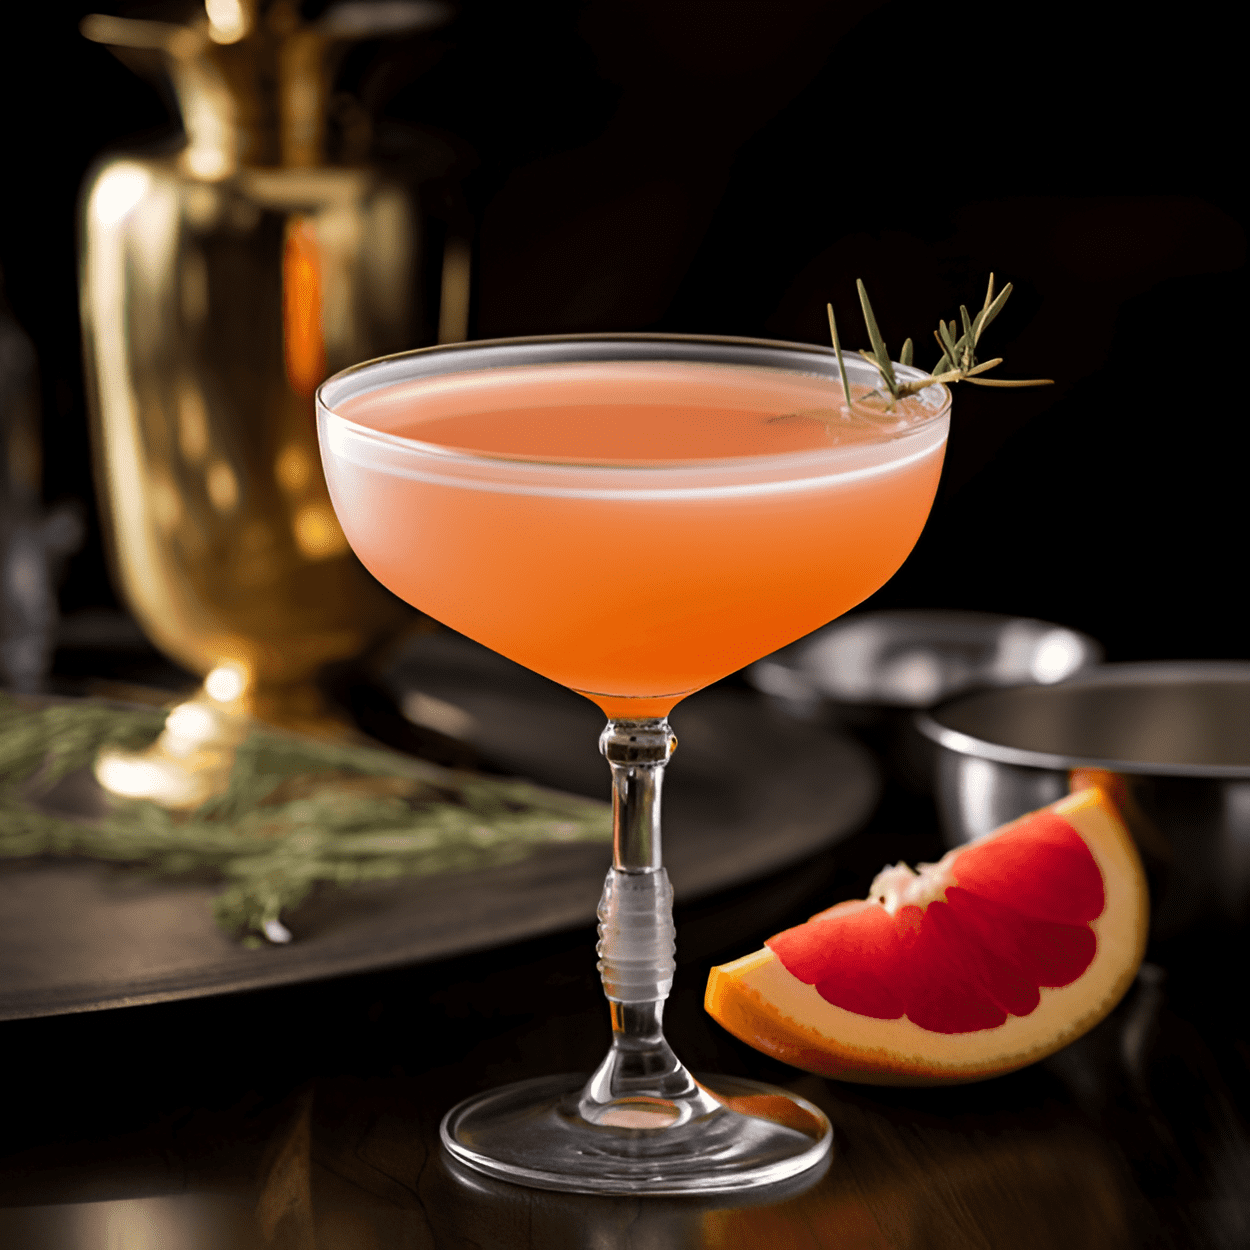 Thunderbird Cocktail Recipe - The Thunderbird cocktail is a delightful blend of sweet, sour, and strong flavors. The sweetness of the grenadine and the sourness of the grapefruit juice are perfectly balanced by the strong, robust taste of the whiskey.